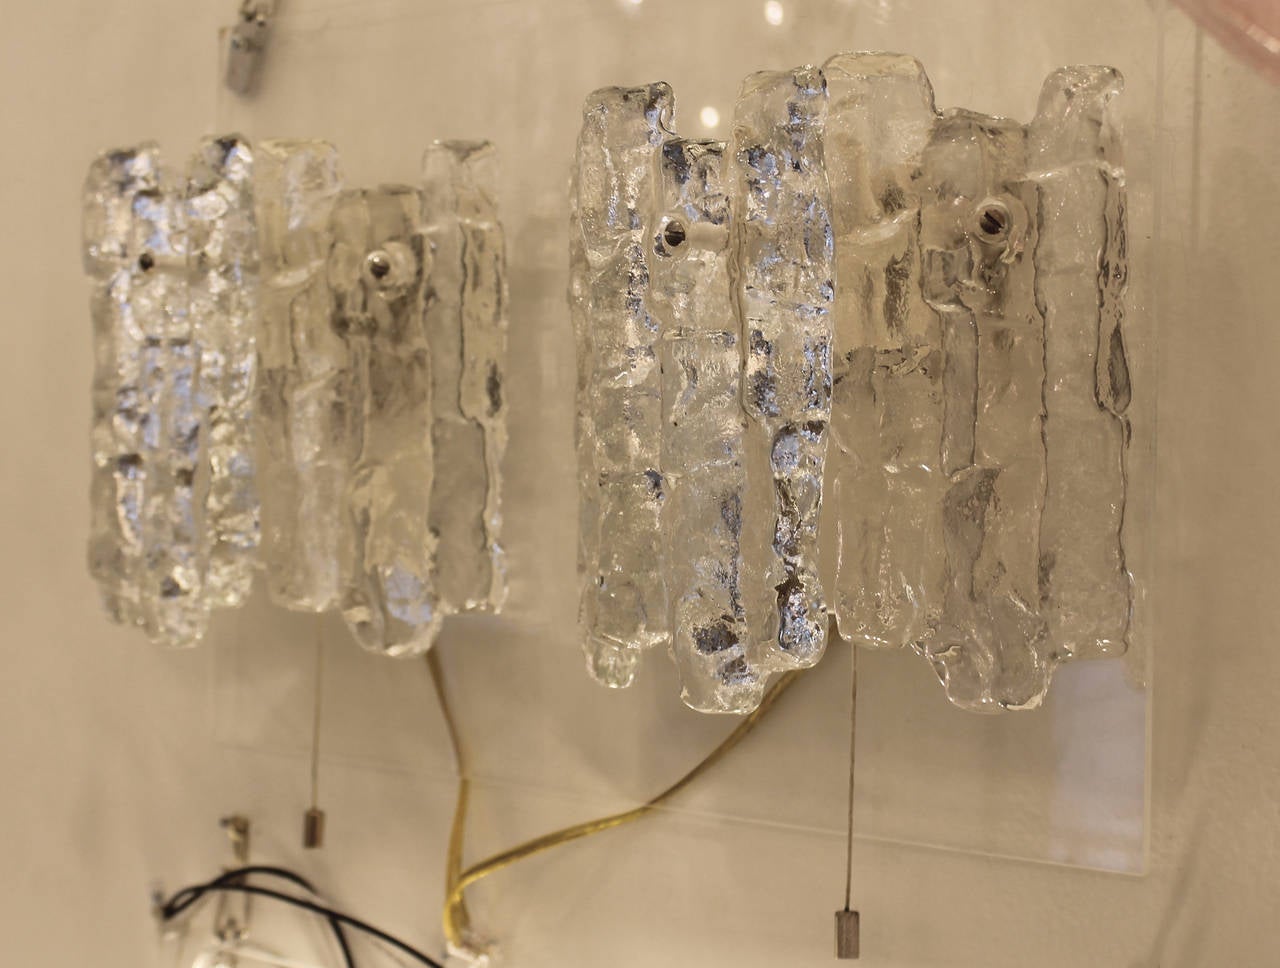 Each sconce features three icicle textured glasses and two sockets with a pull switch.